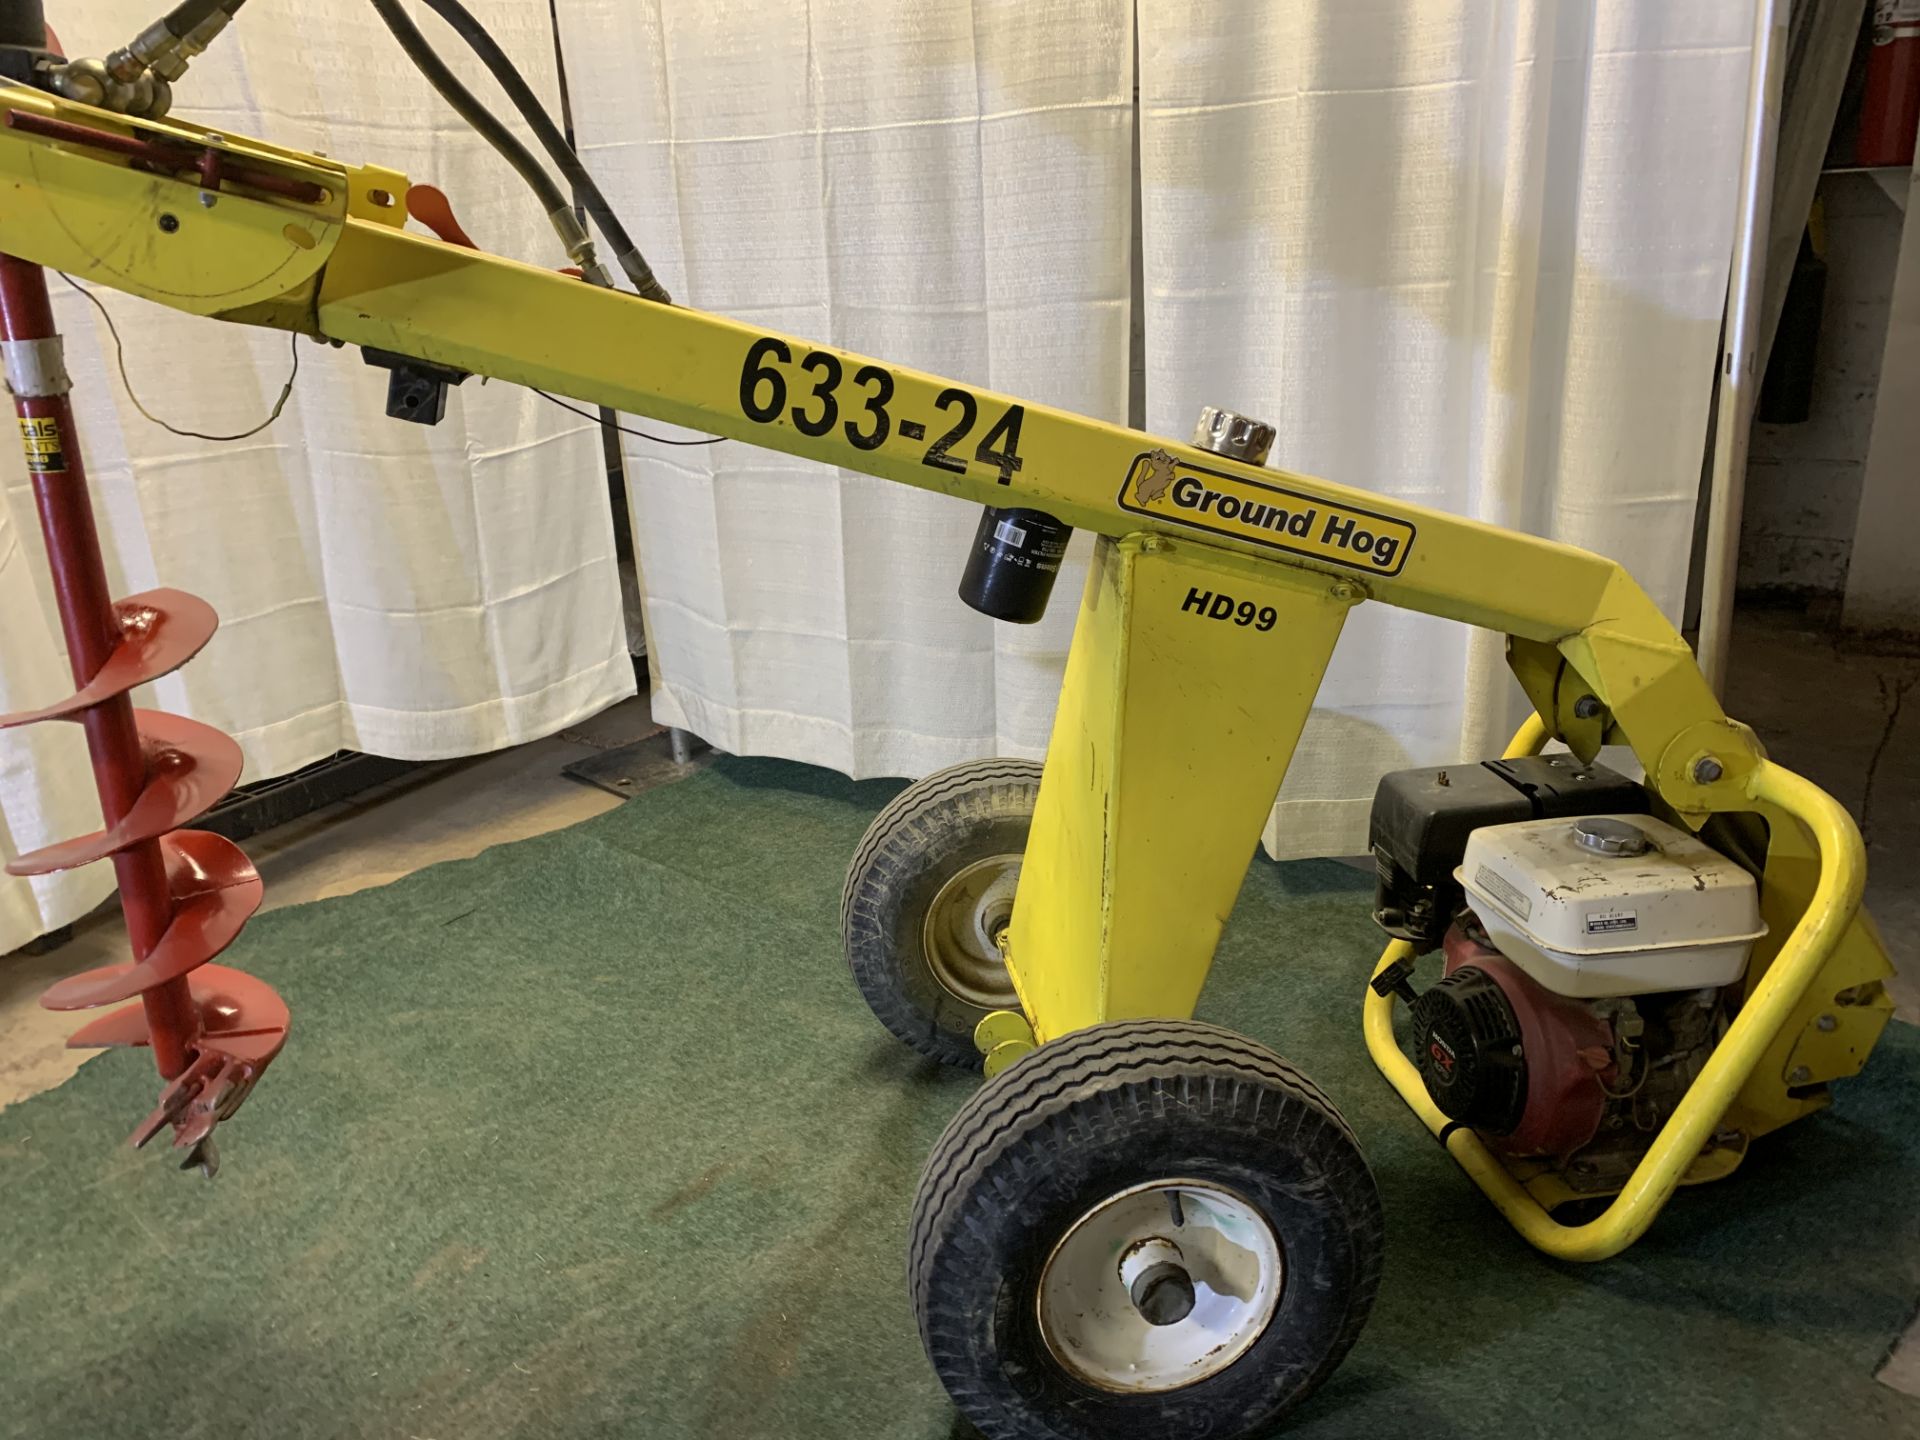 Ground Hog HD99 hydraulic post digger with auger, s/n 804132 - Image 2 of 3